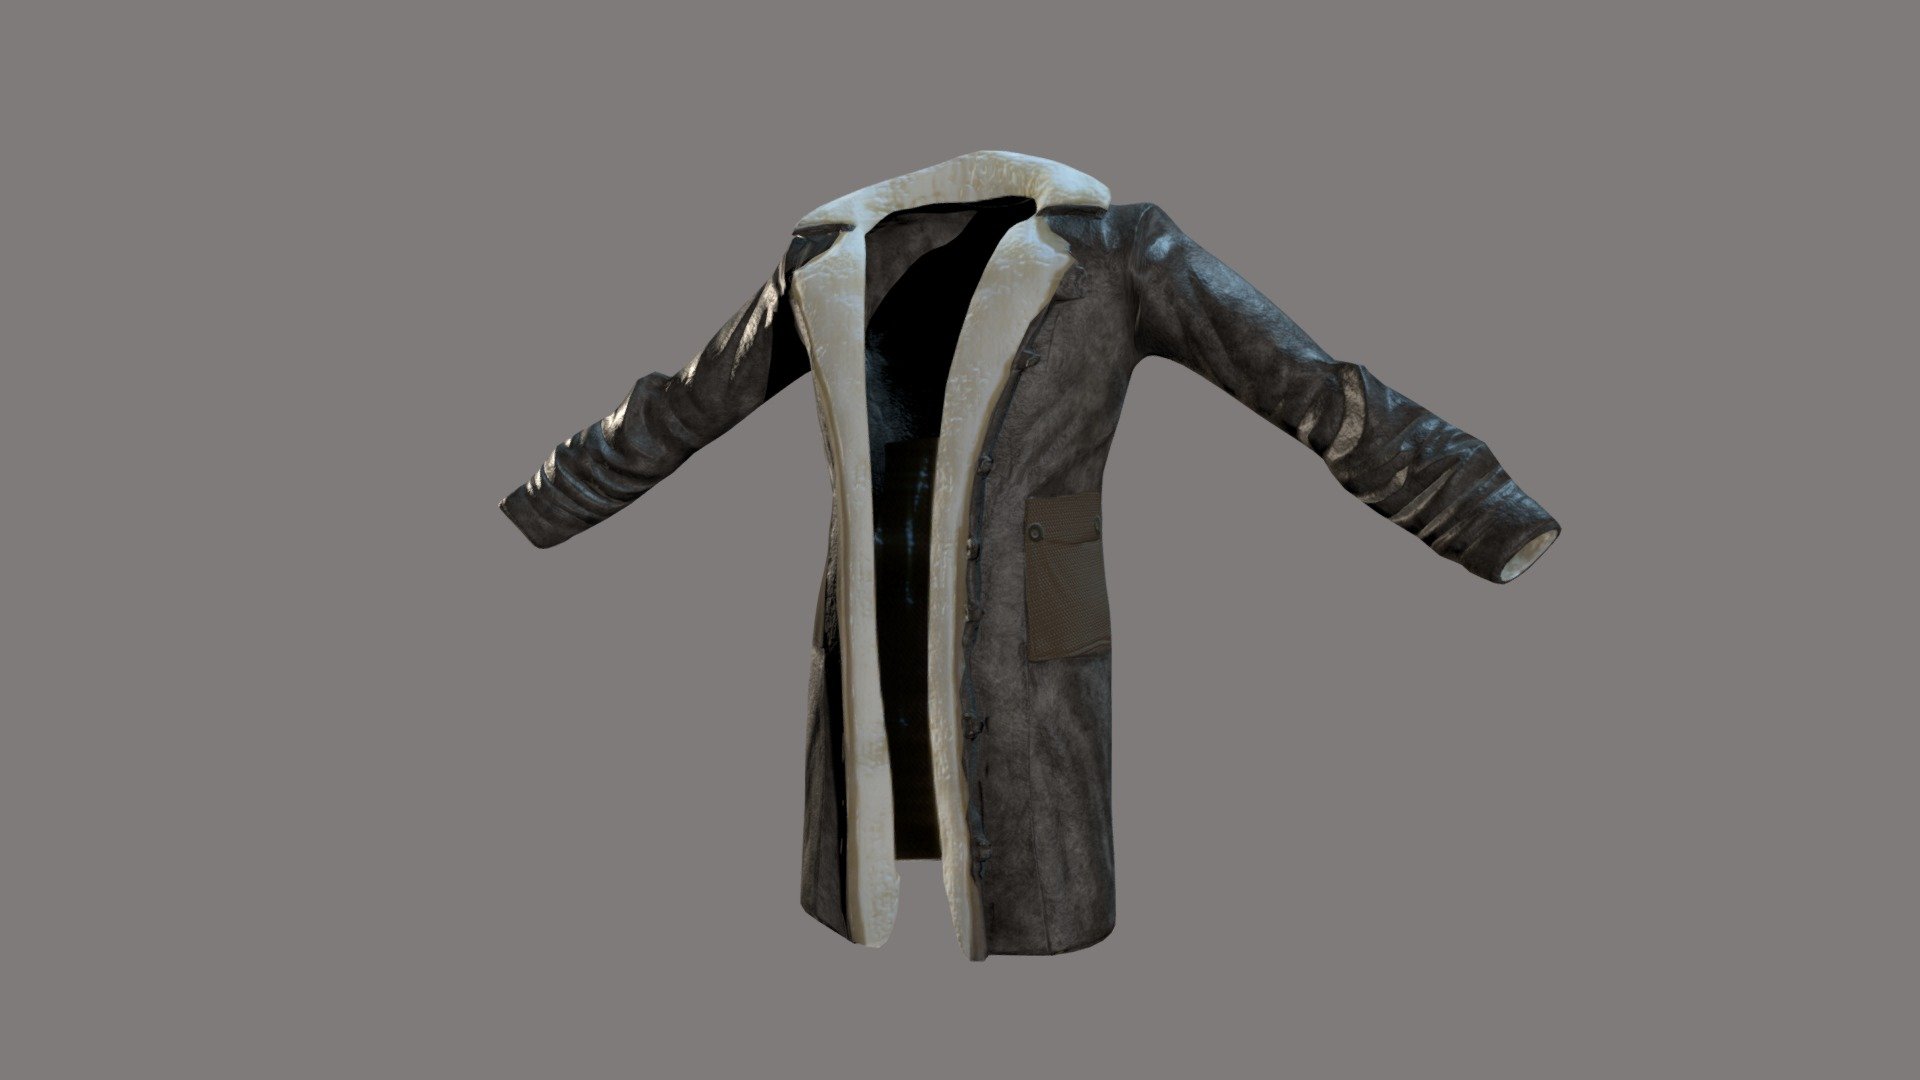 Bane's Jacket From the Dark Knight Rises